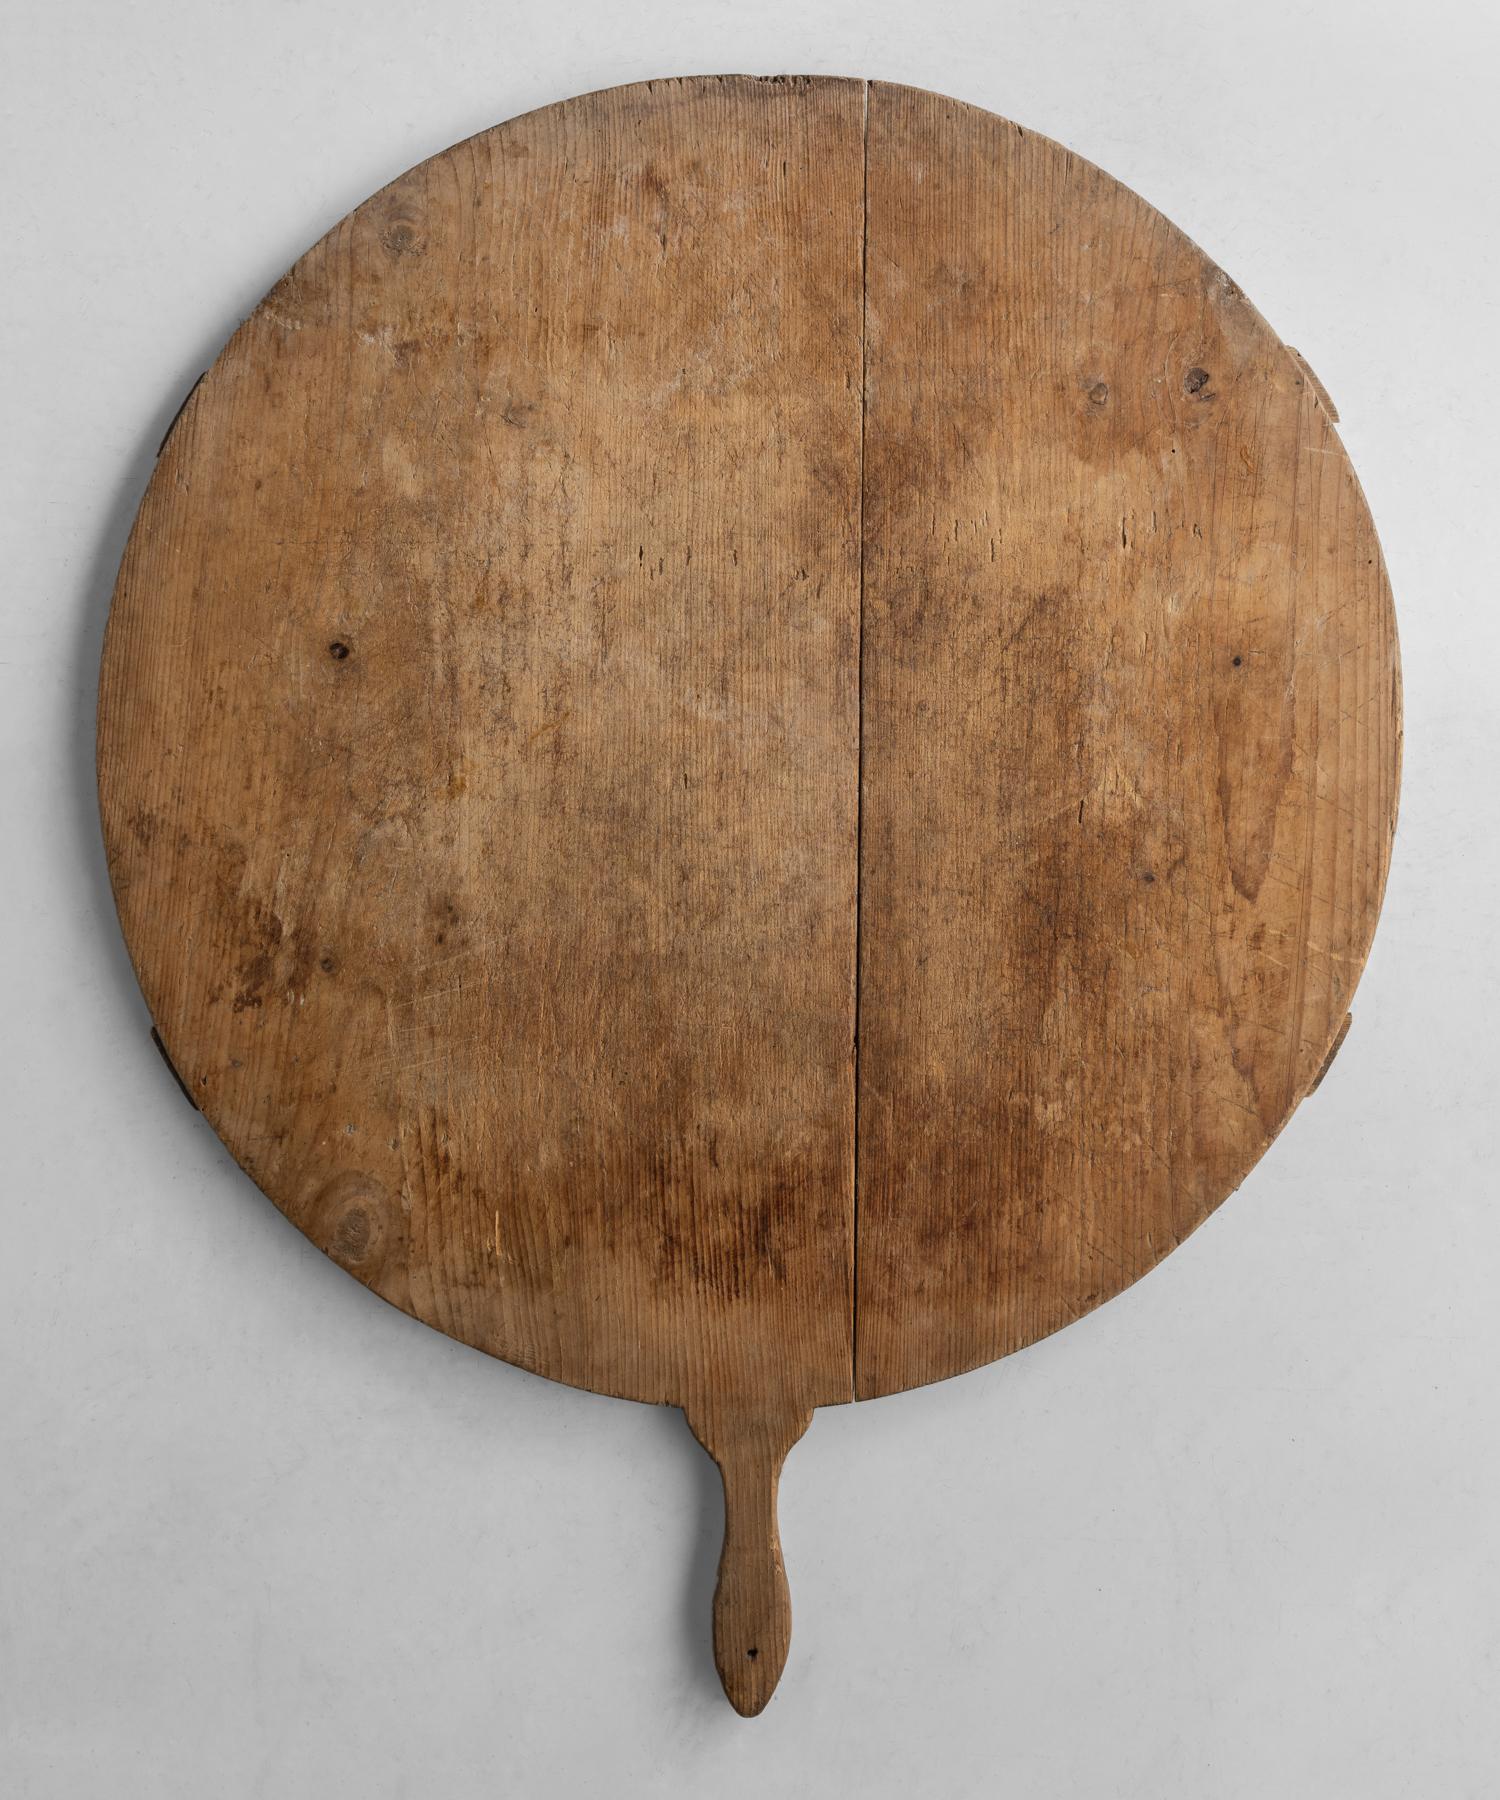 Round cutting board, America, circa 1900.

Single-sided, beautifully worn Primitive form with stretcher support underneath.

Measures: 25.25